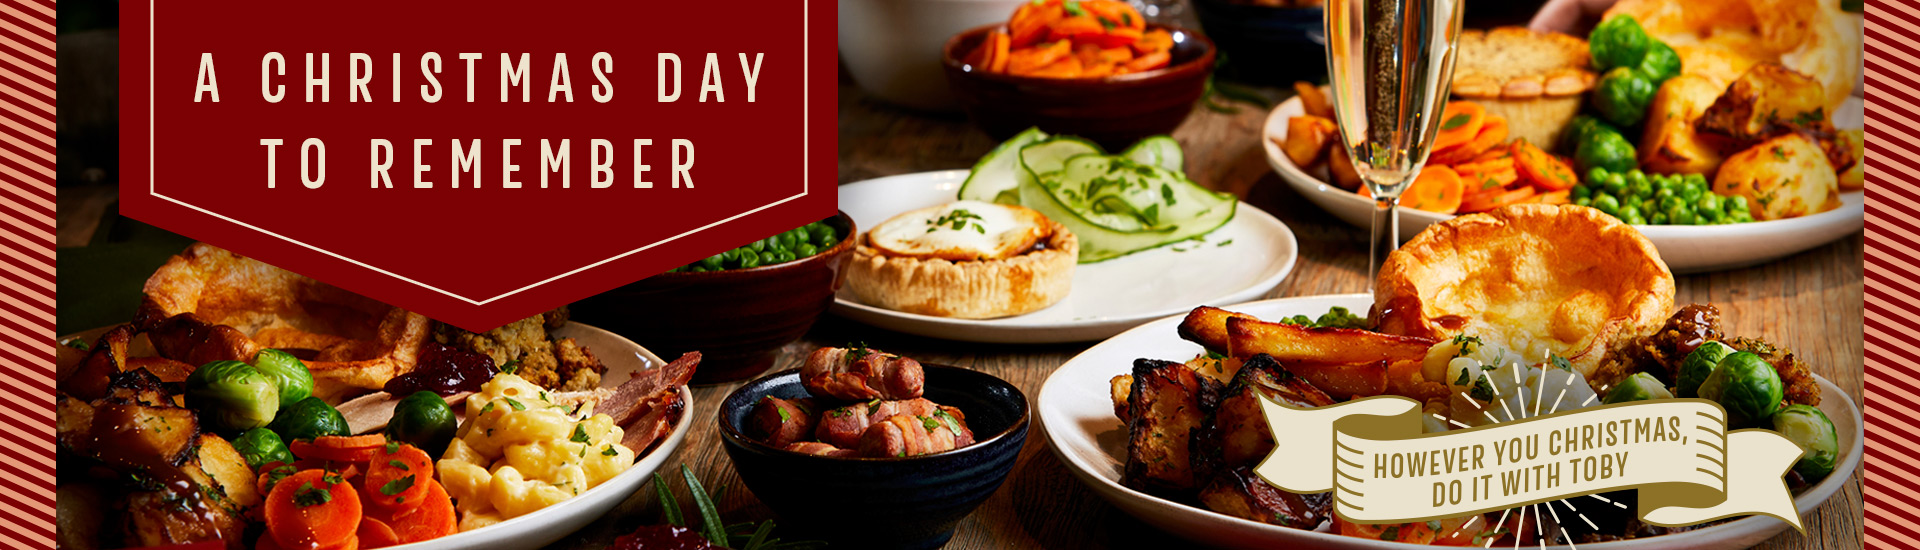 Christmas Day menu at Toby Carvery Captain Manby